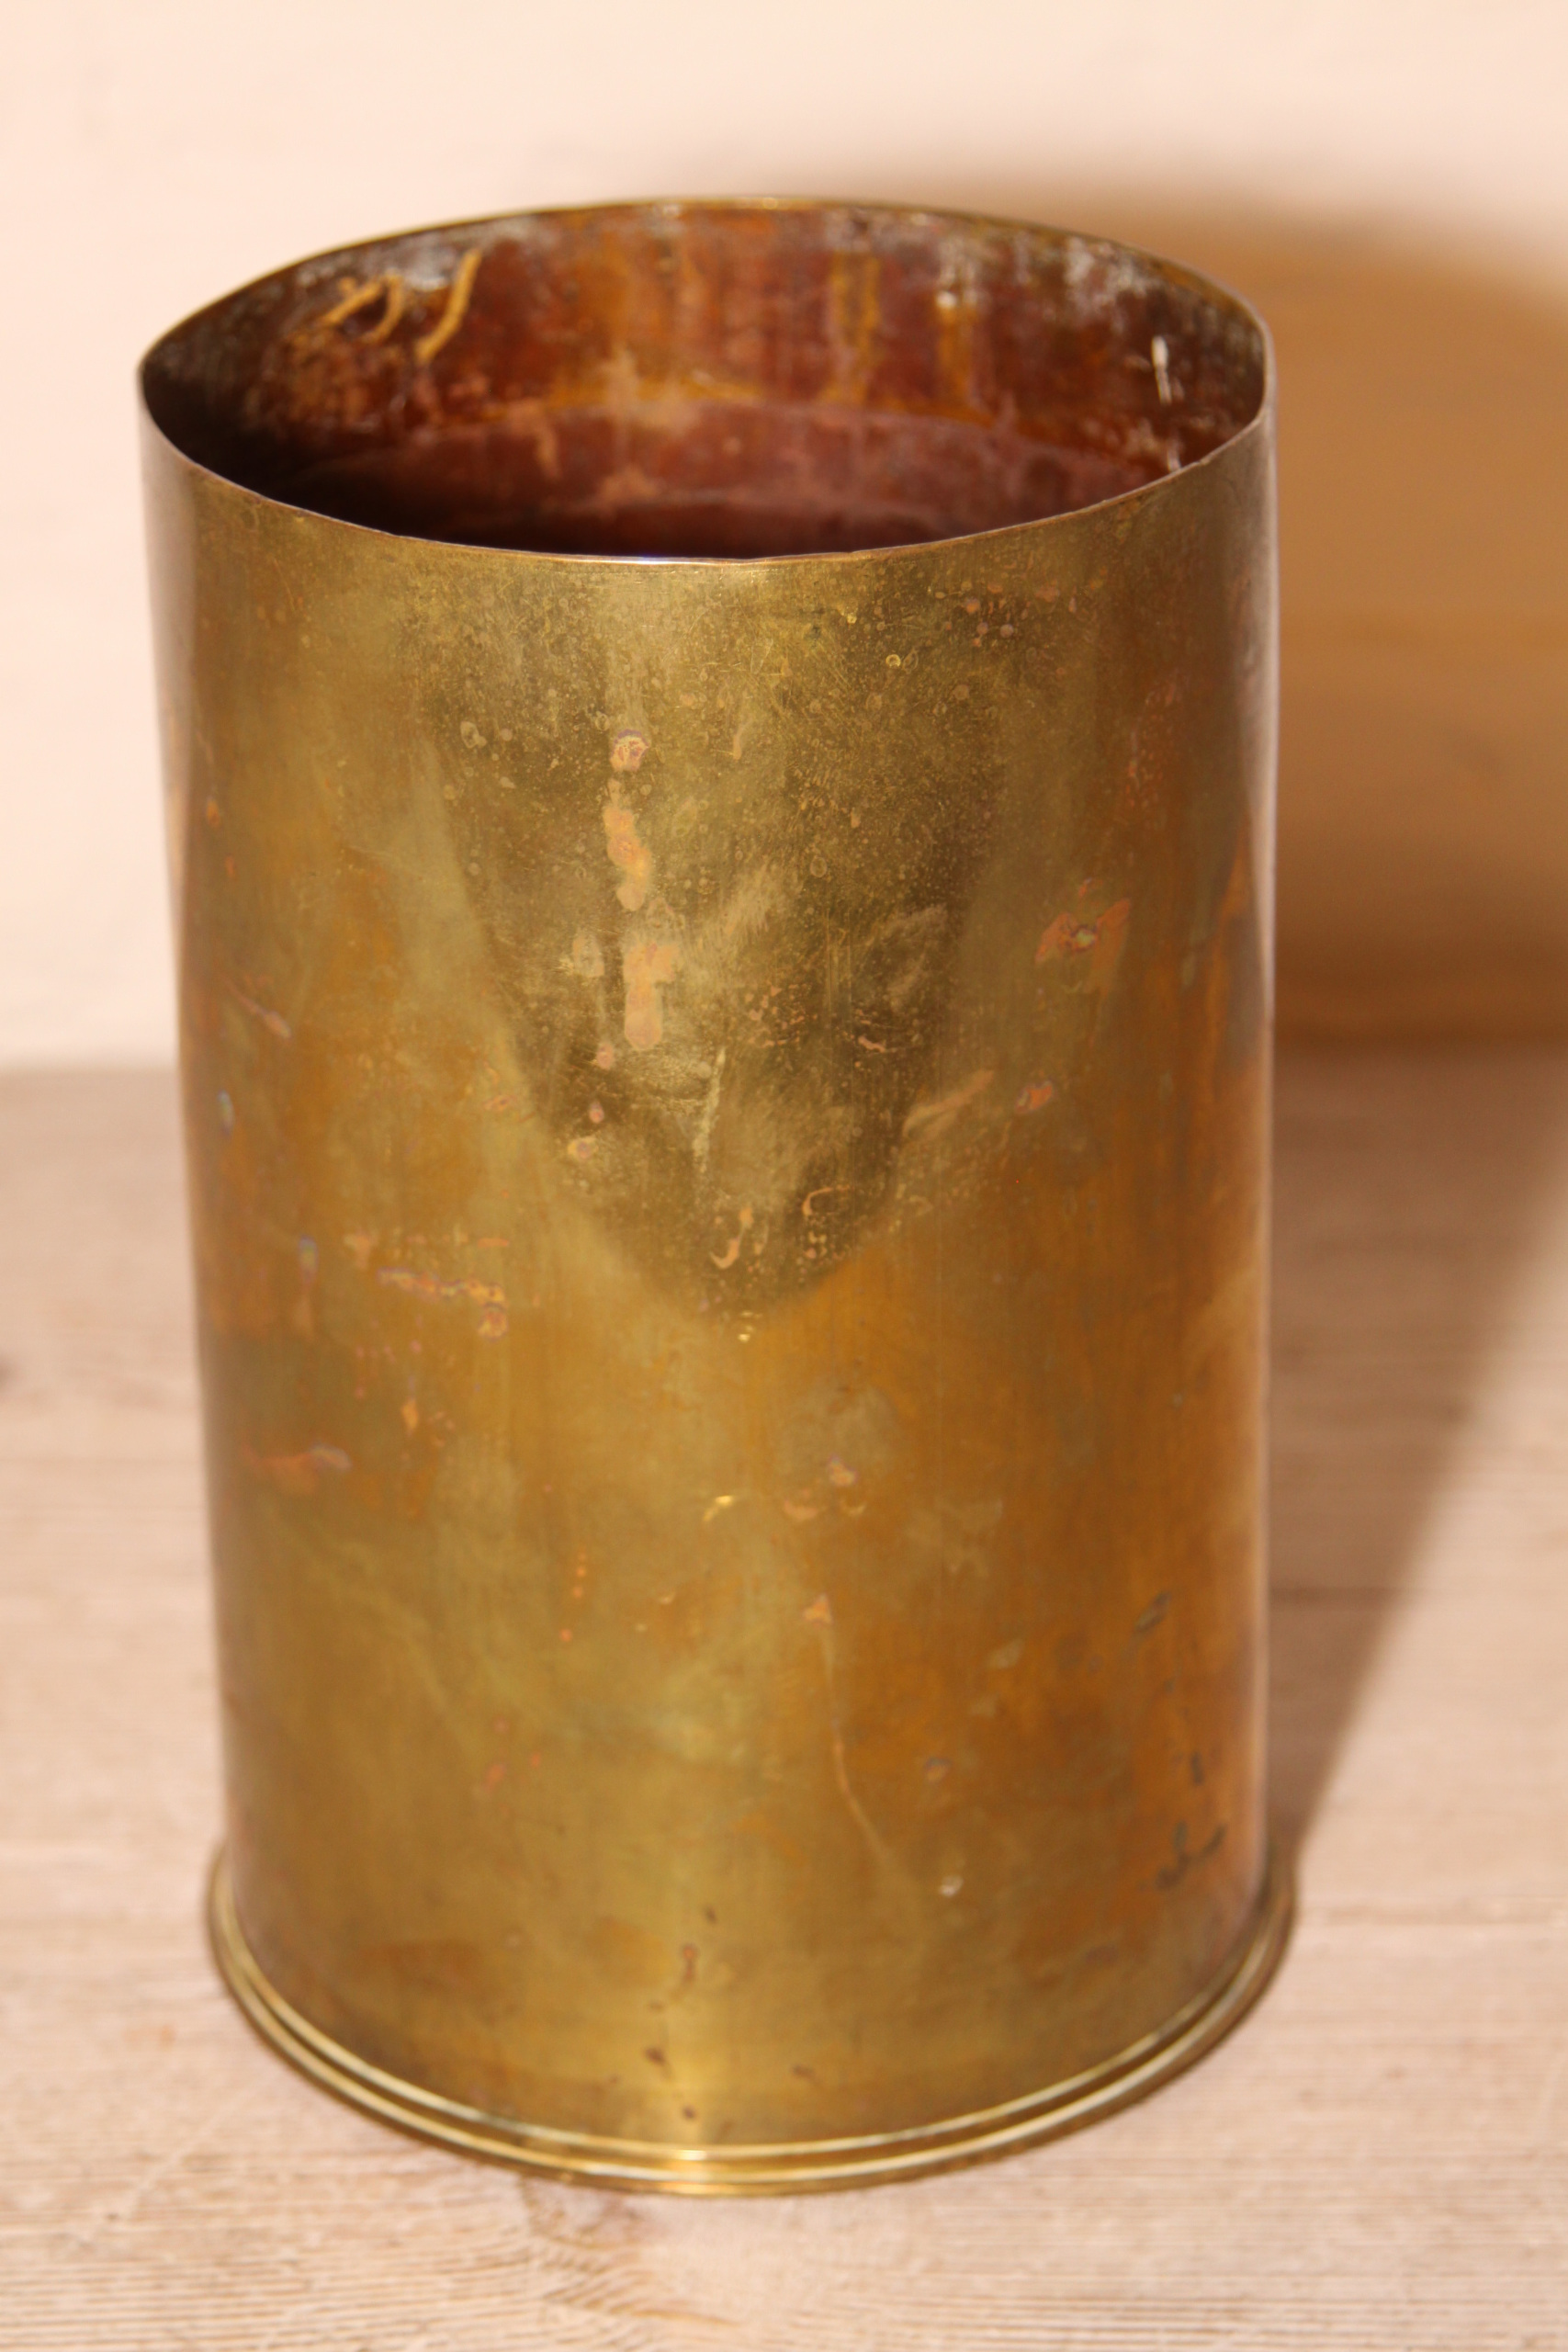 Antique Shell Casing 